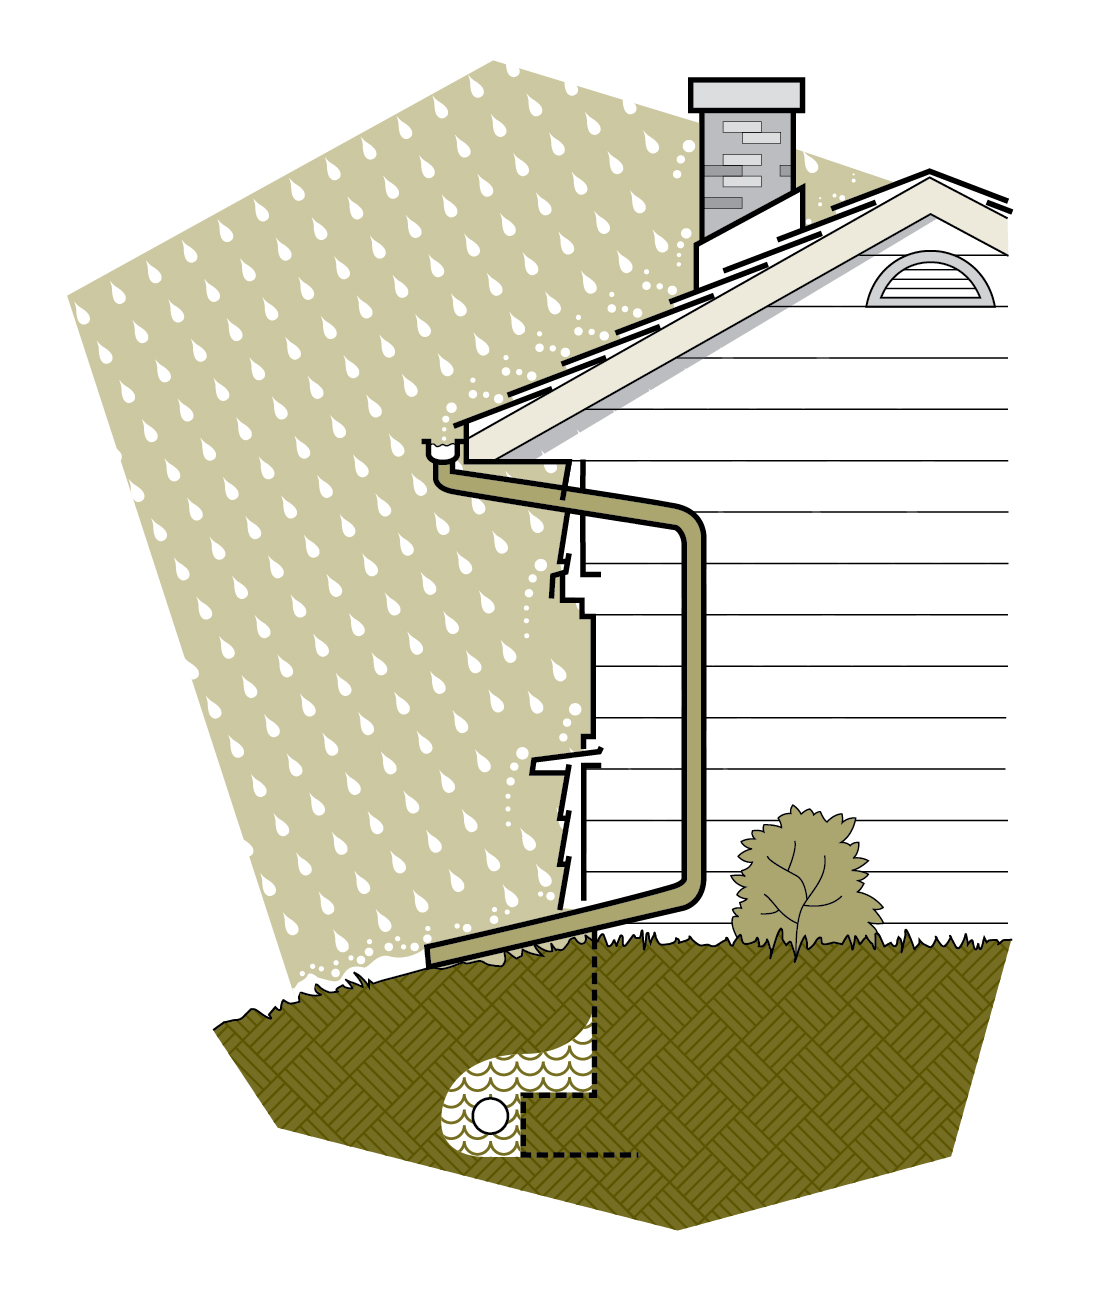 The building envelope must shed water from the roof to the footings.